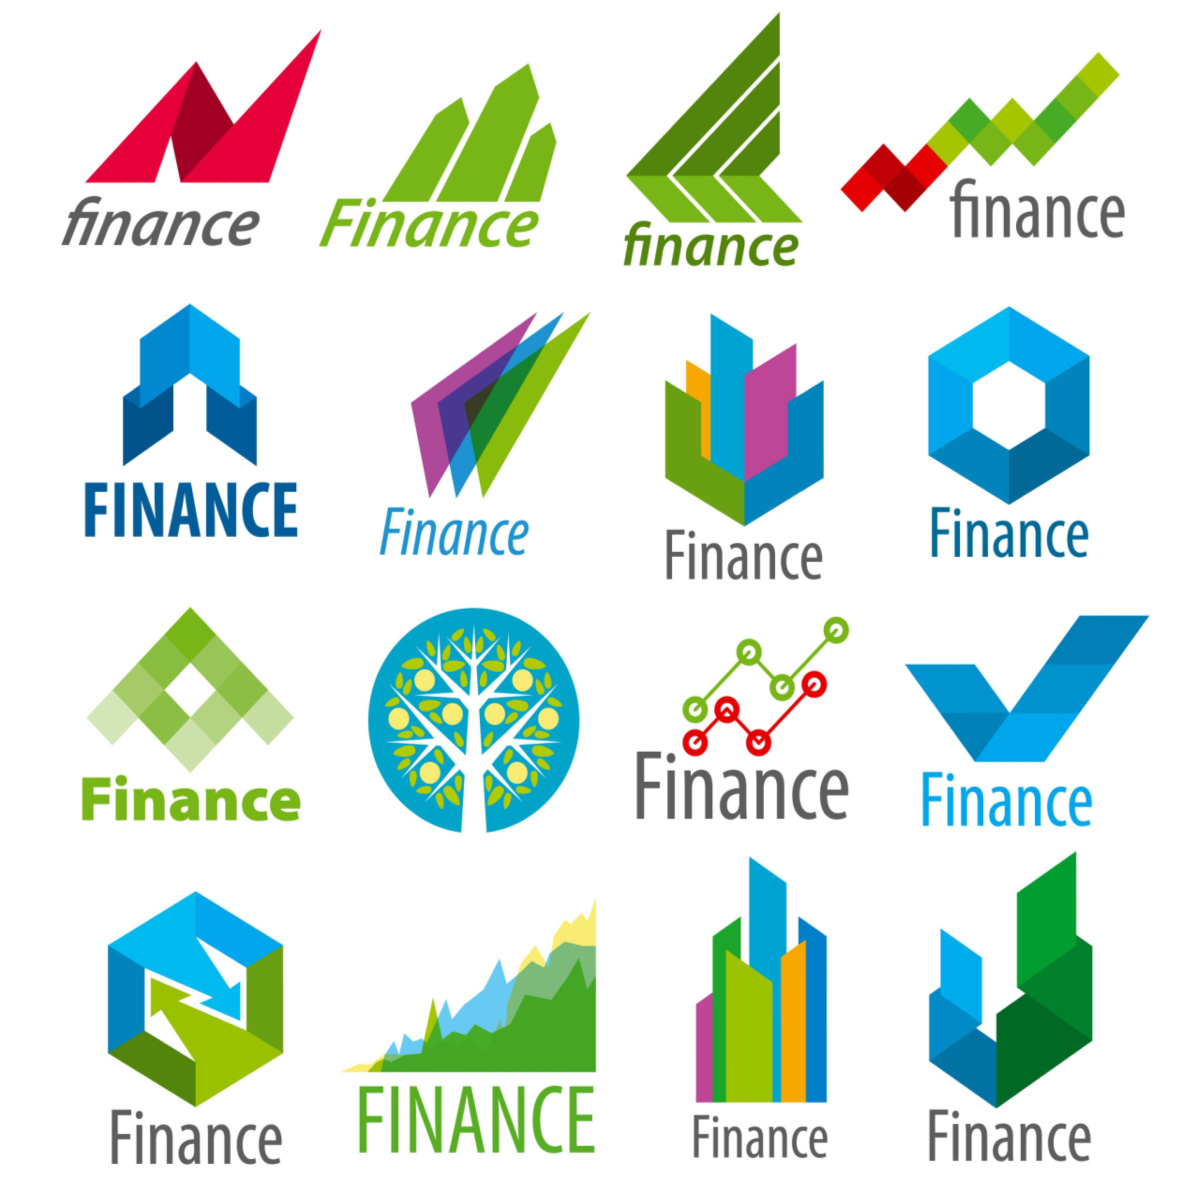 Need Ideas for Your Finance Logo Design